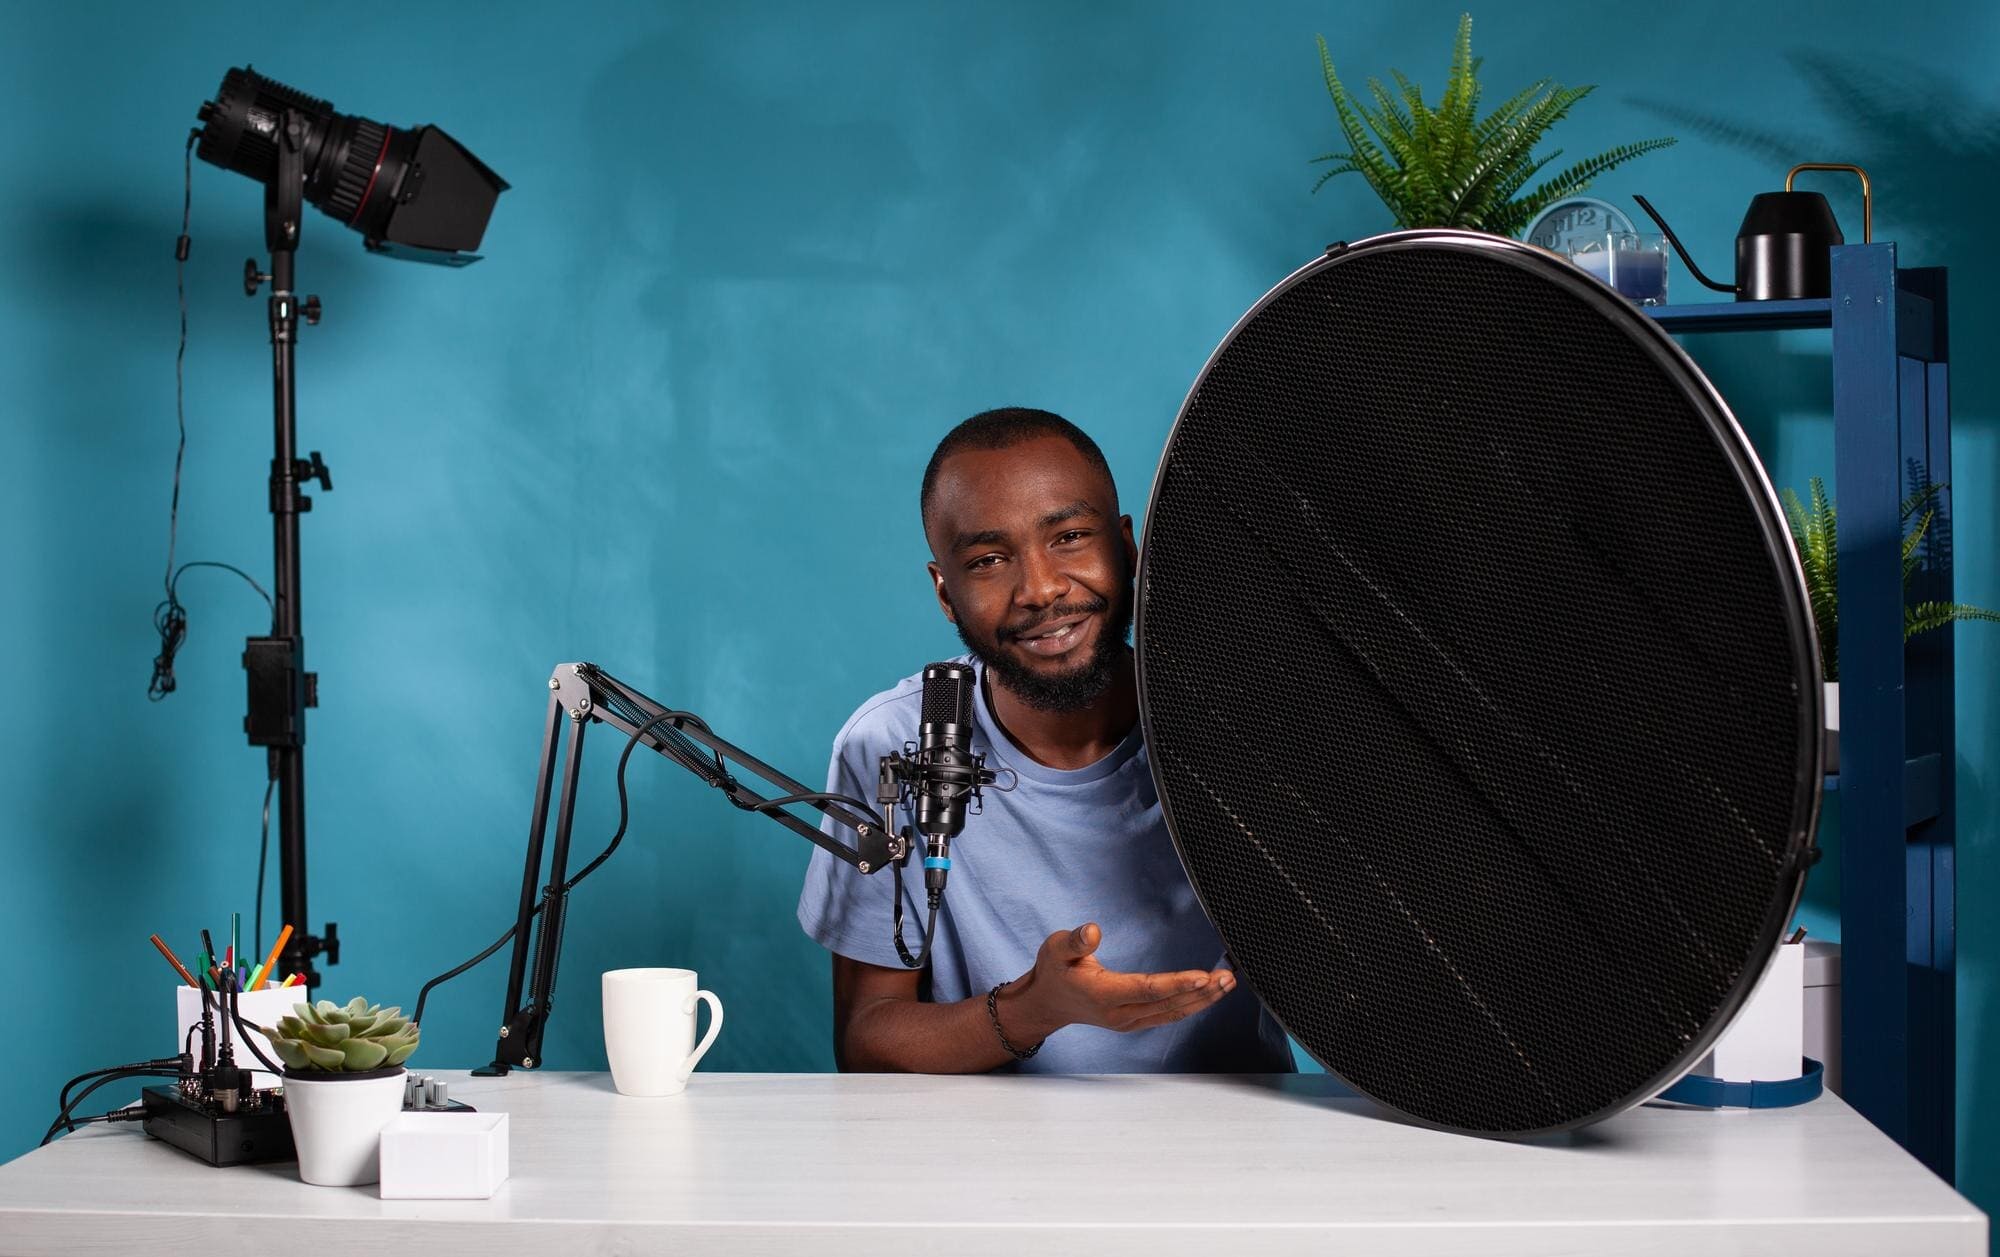 vlogger explaining features studio flash light modifier sitting desk with microphone vlogging studio portrait photography equipment reviewer presenting beauty dish honeycomb grid 482257 42668 1